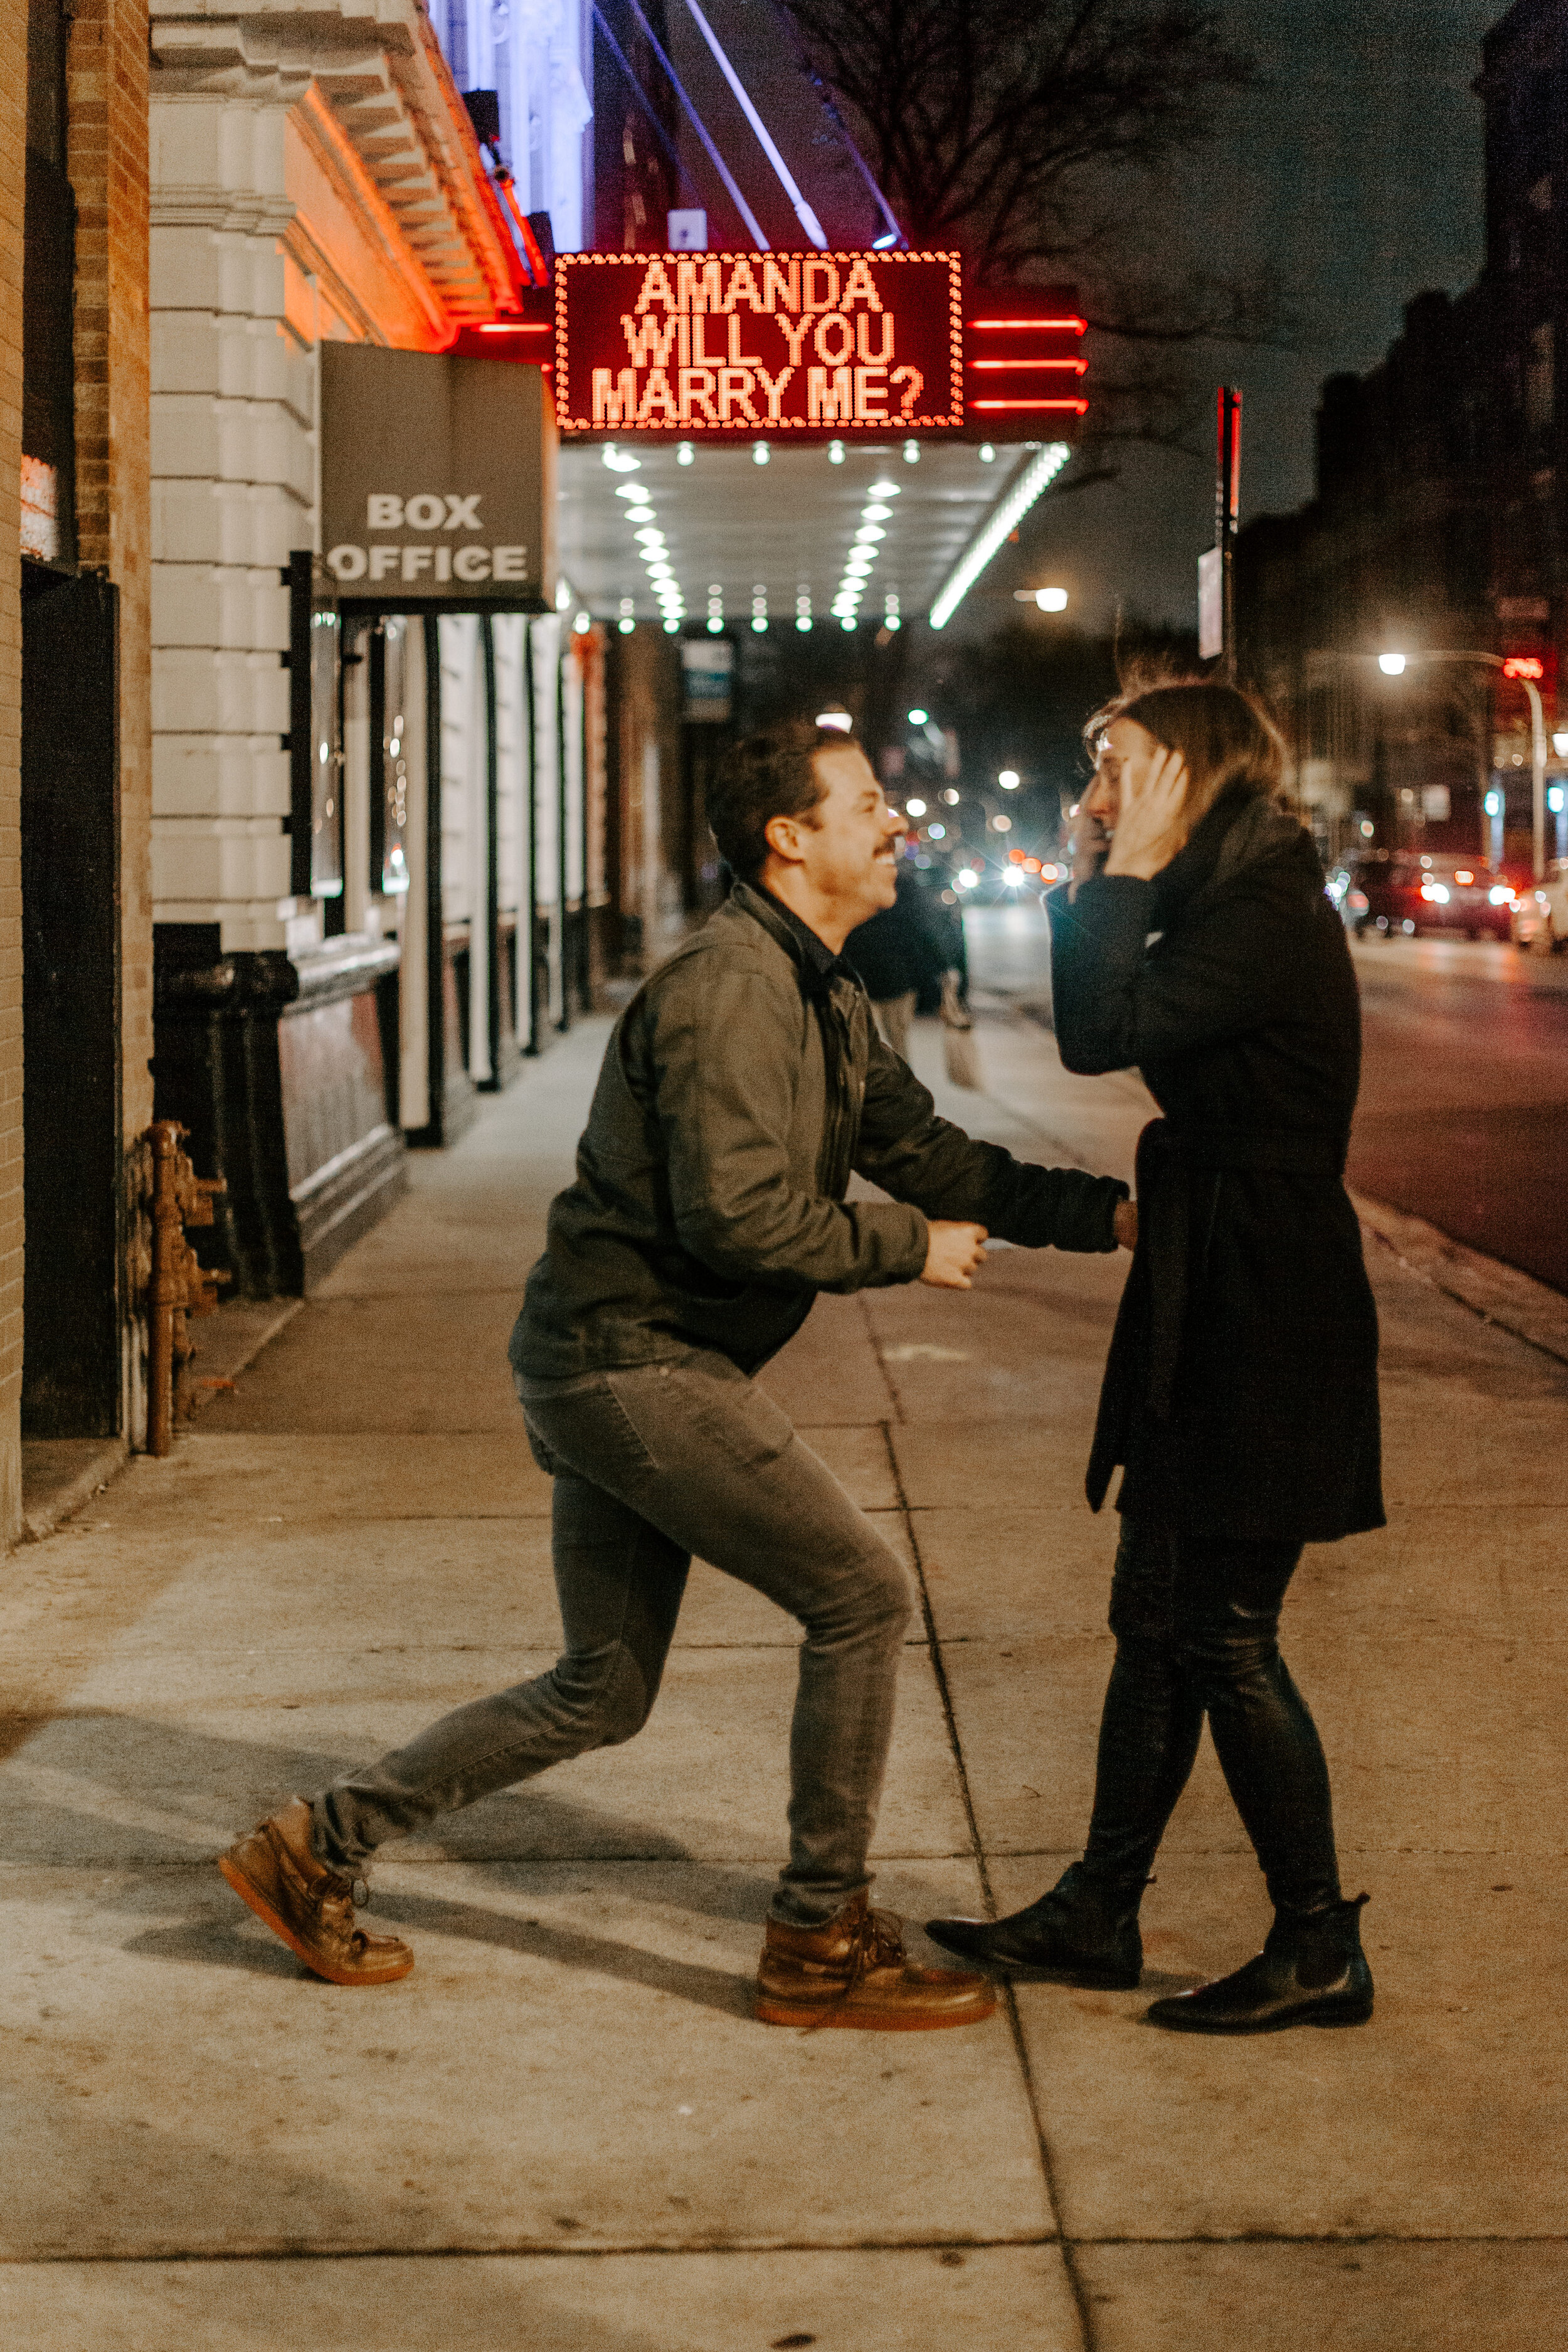  Chicago surprise proposal, man stands up from one knee after proposing as his fiance reacts emotionally in front of theater marquee reading Amanda Will You Marry Me? Chicago engagement photographer, Lucy B. Photography 